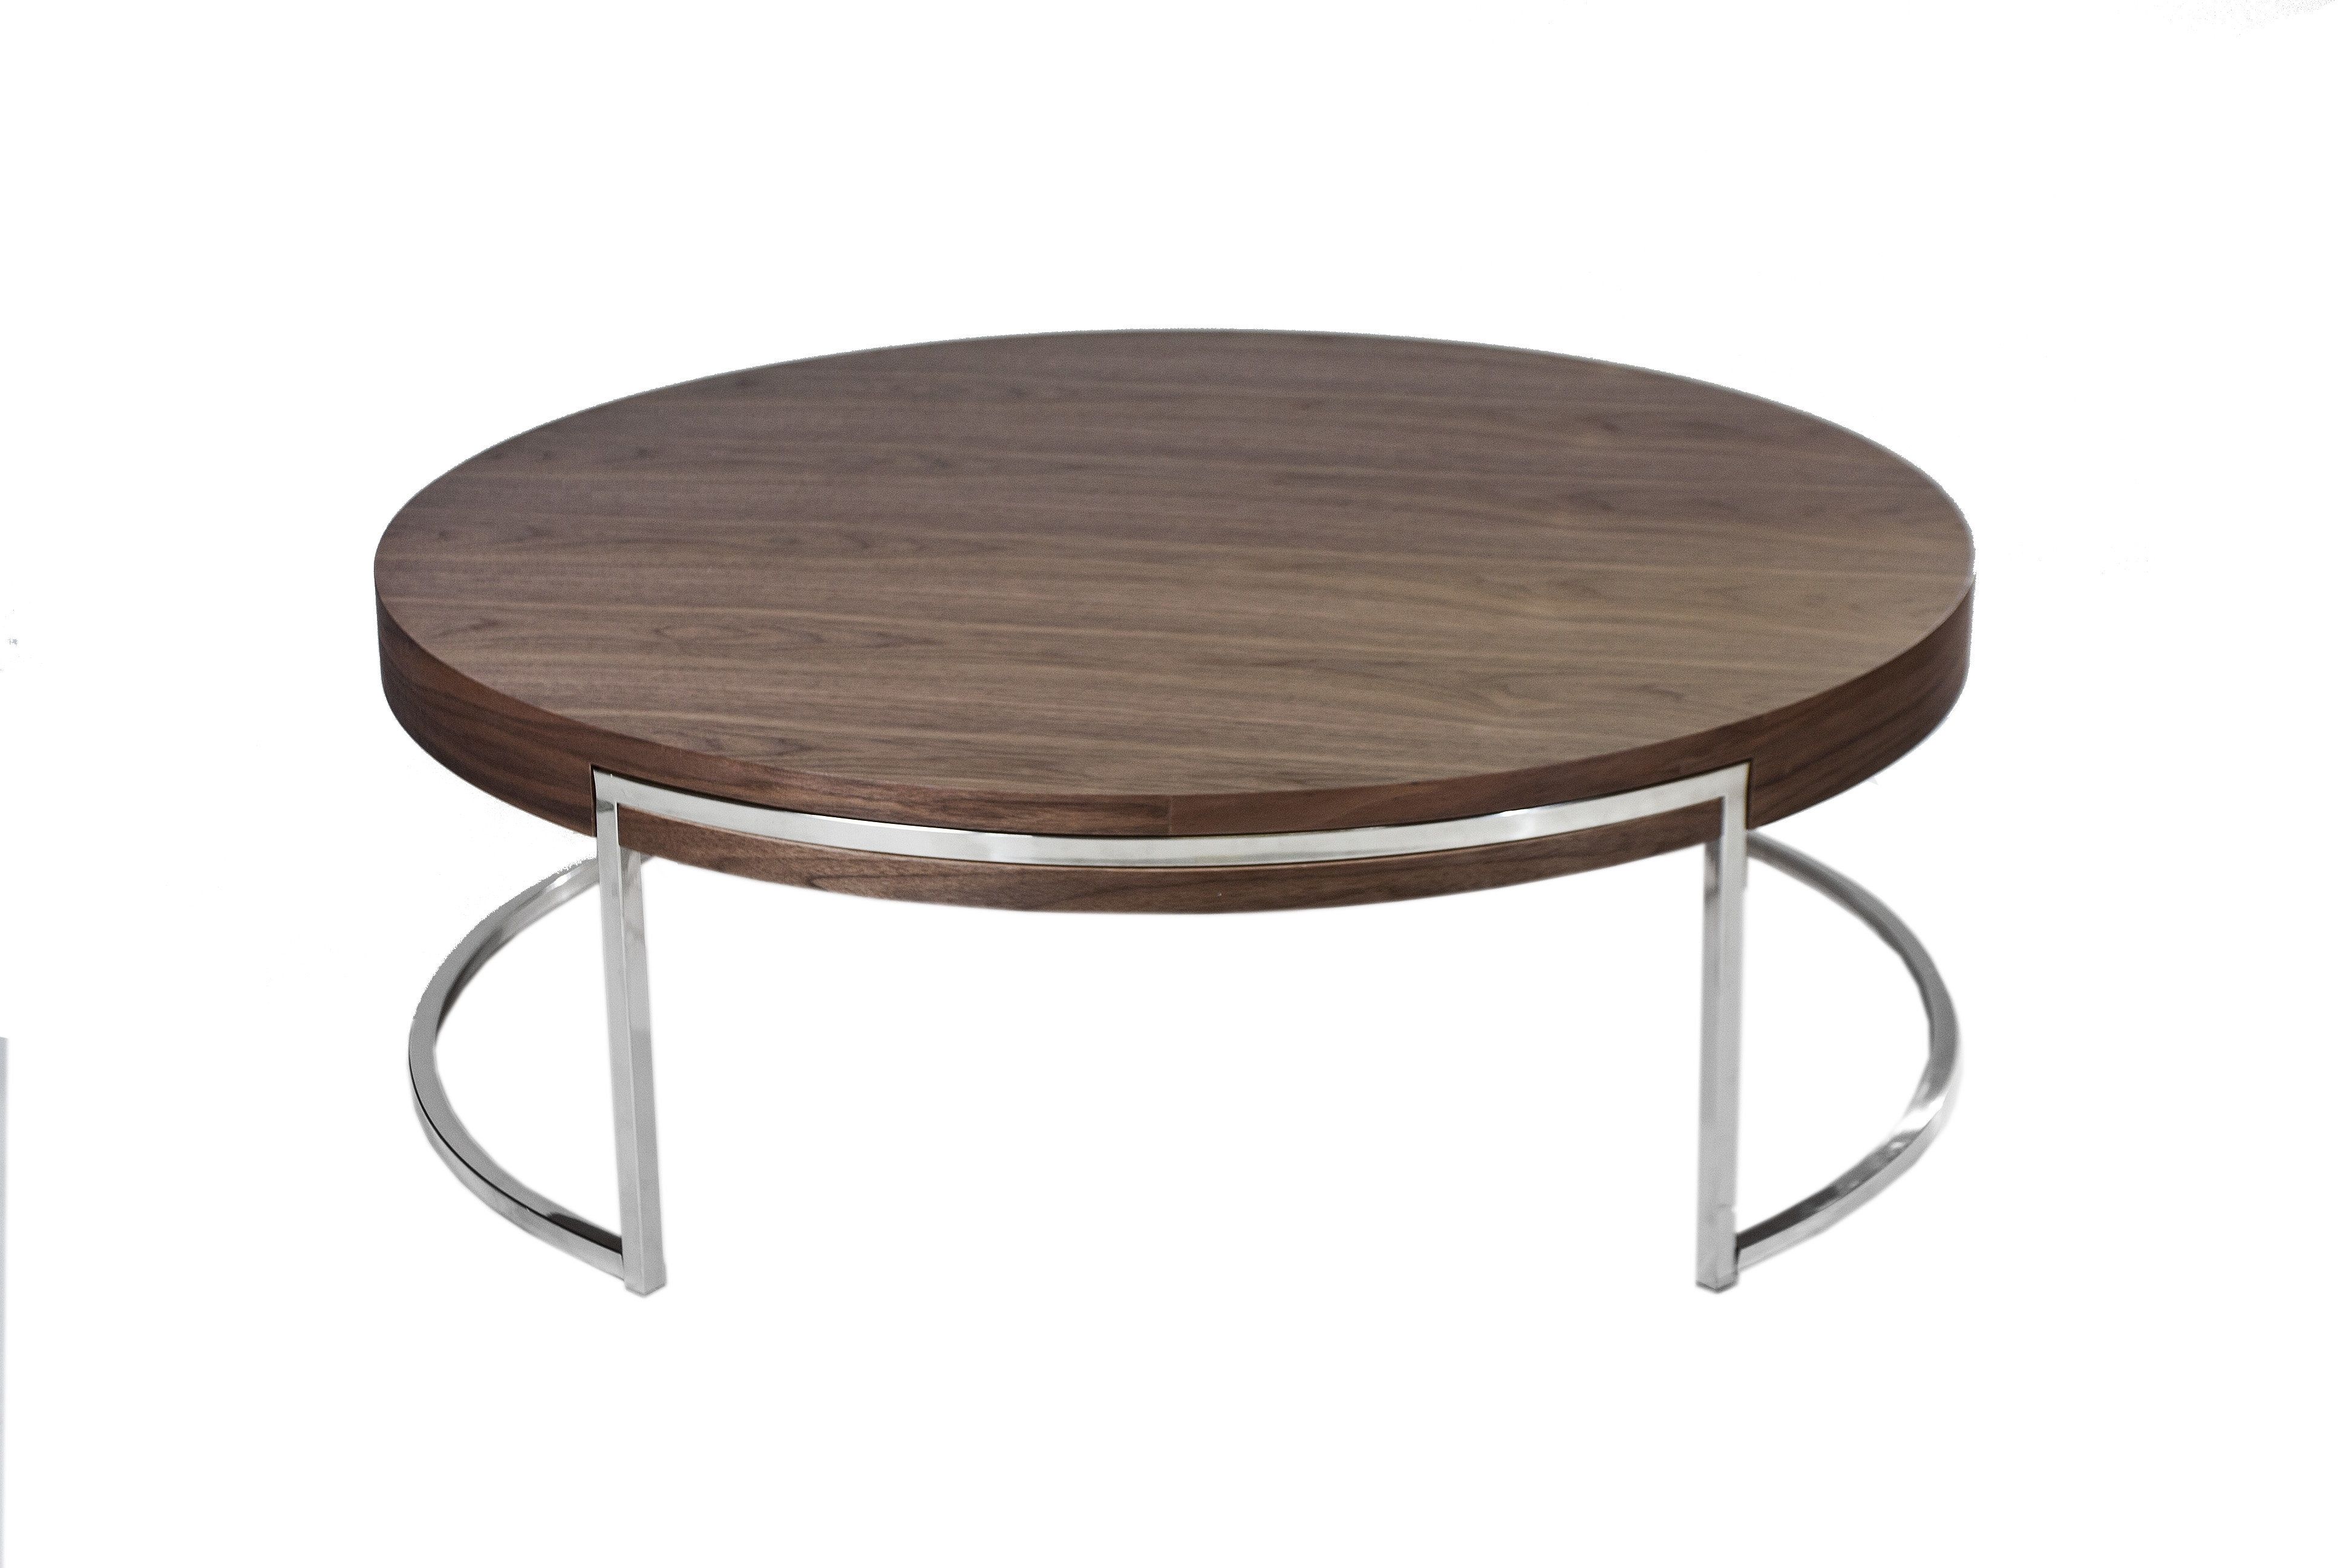 Brayden Studio Cutler Coffee Table & Reviews | Wayfair Pertaining To Stack Hi Gloss Wood Coffee Tables (View 27 of 30)